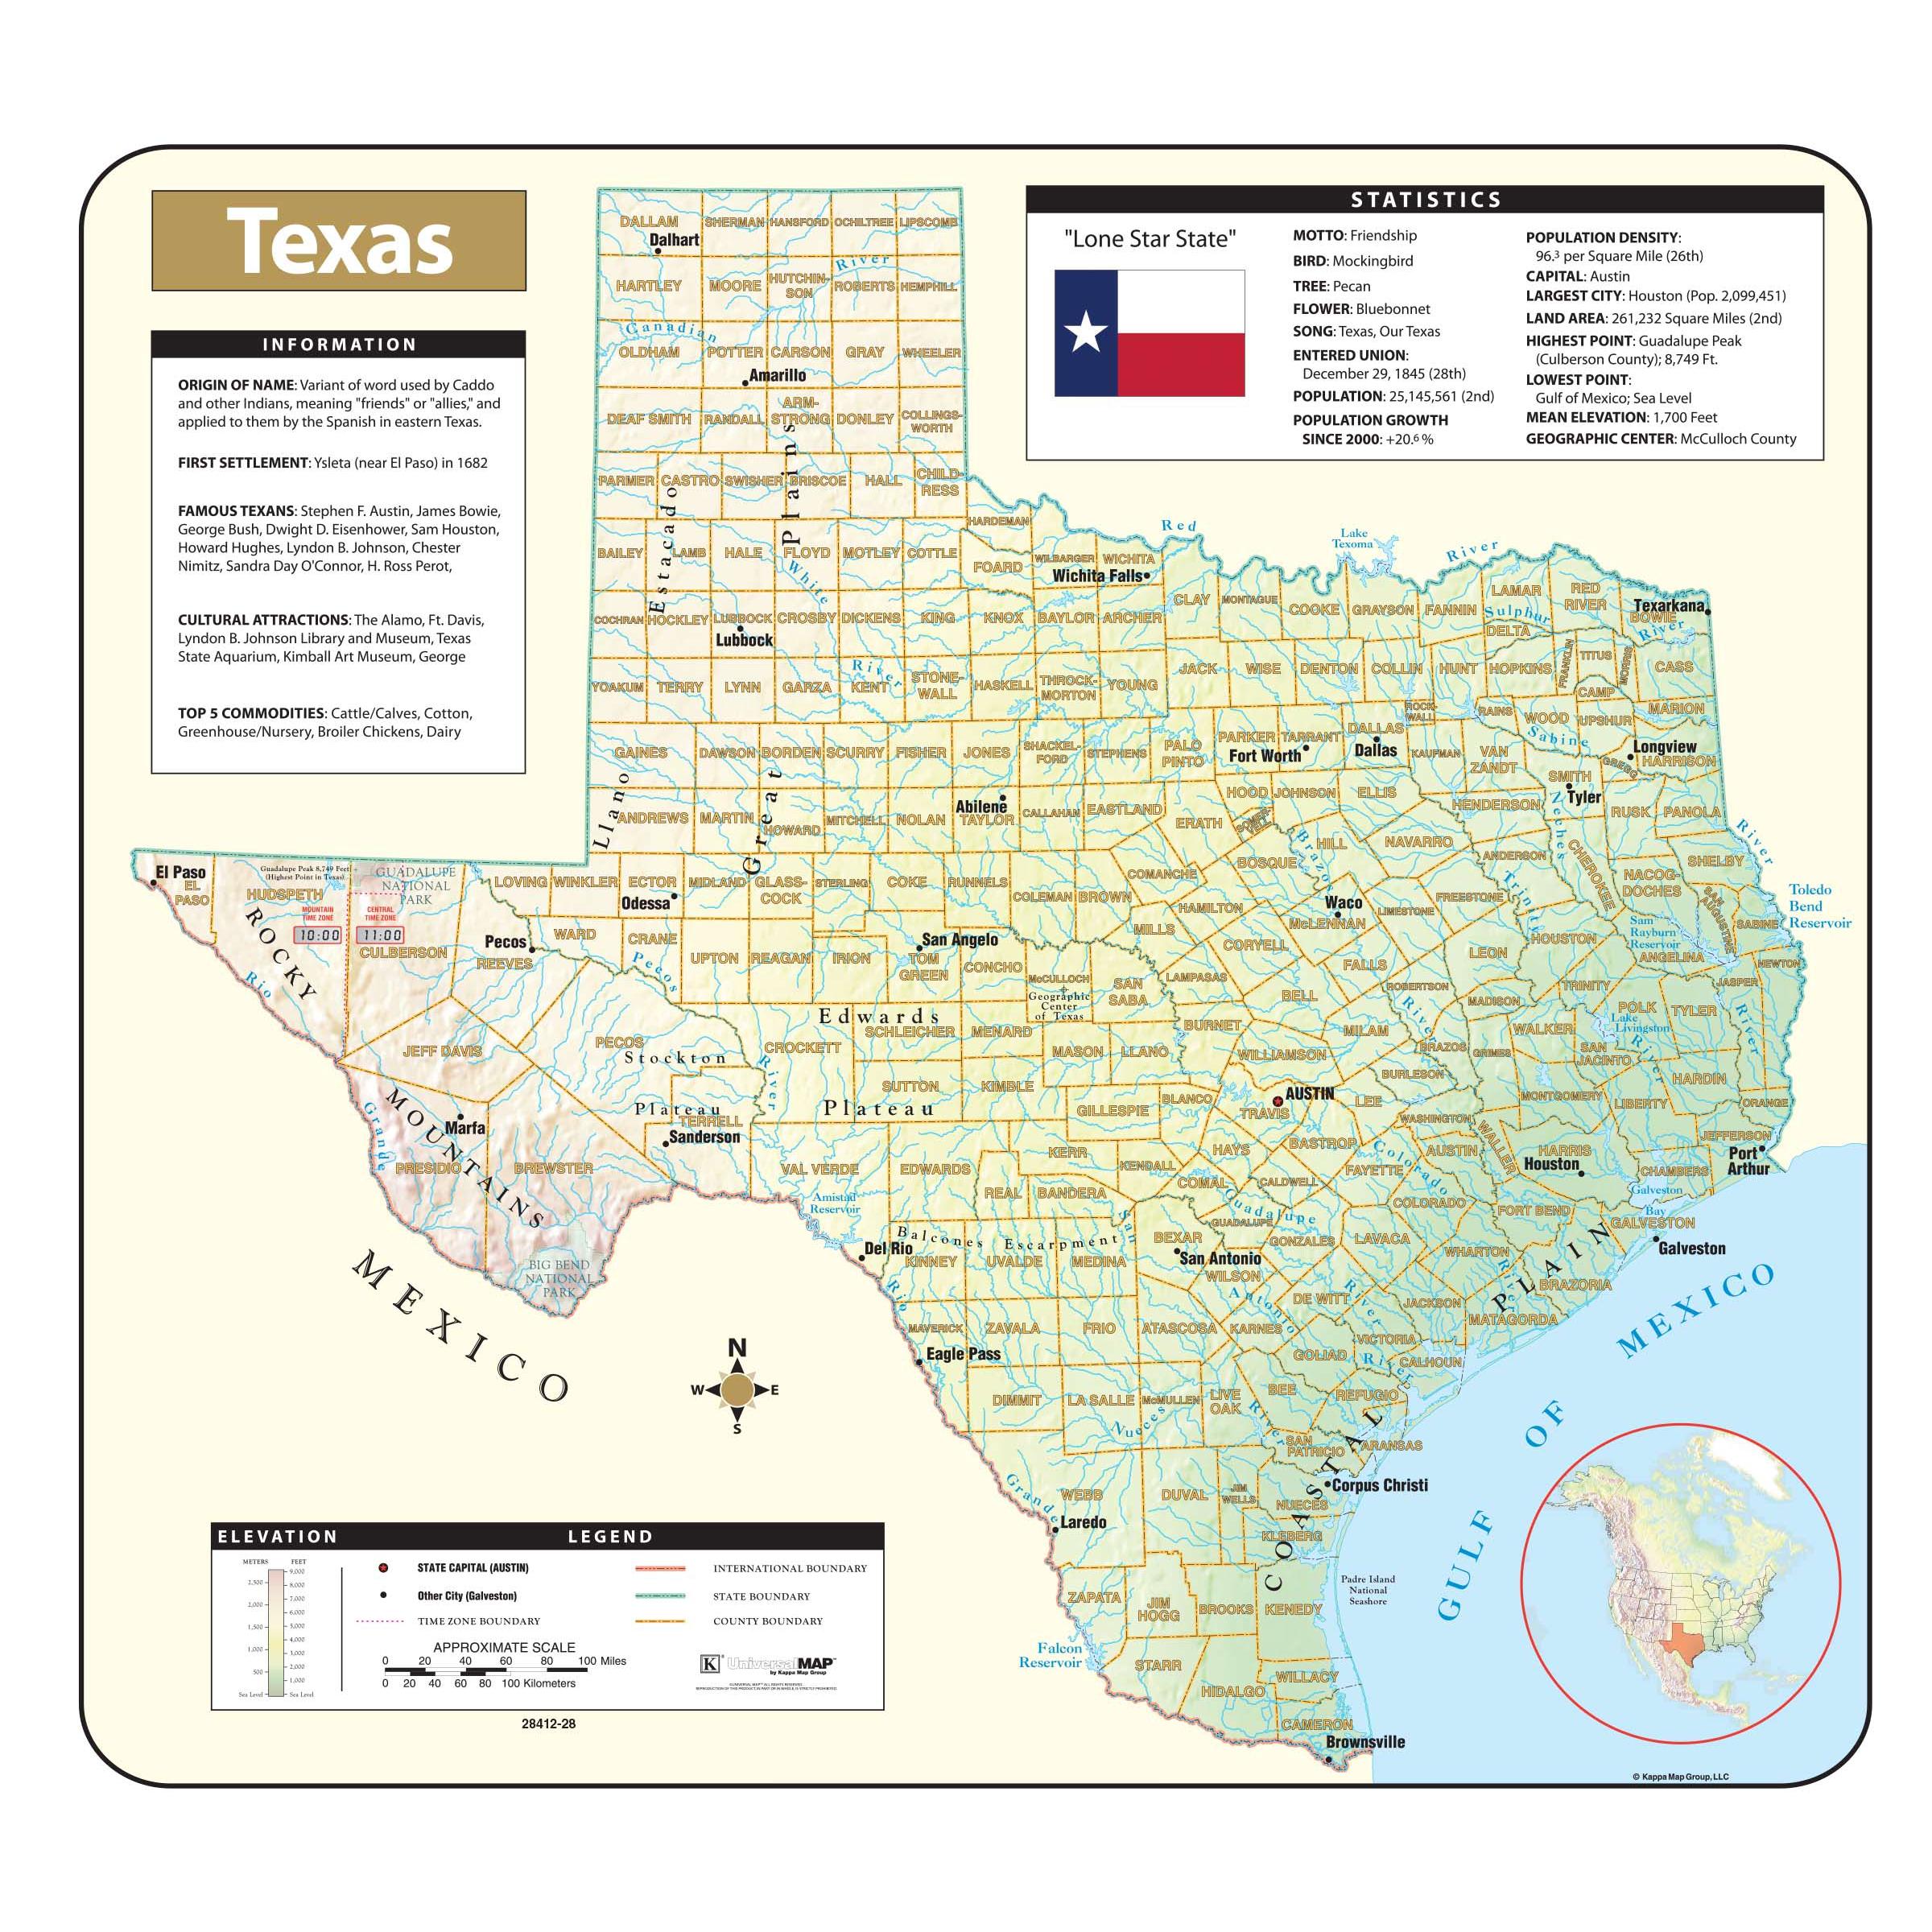 Texas Shaded Relief State Wall Map By Kappa The Map Shop